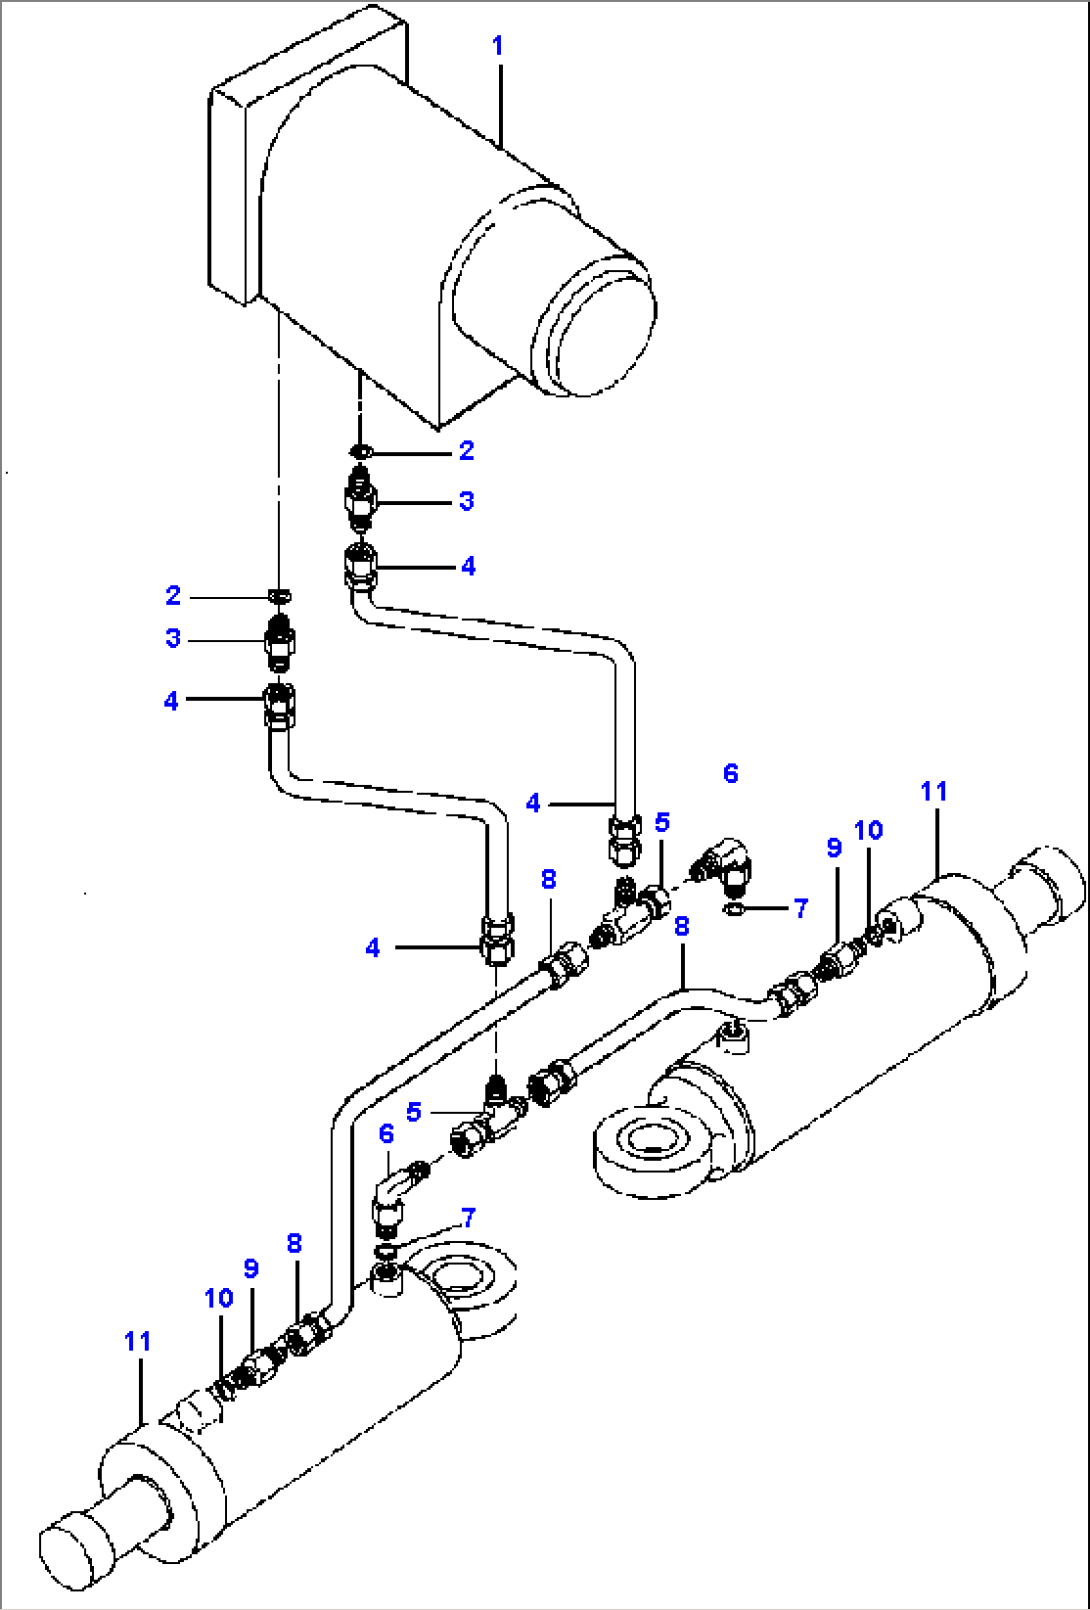 FIG. H5110-01A0 STEERING CYLINDER ACTUATOR LINES